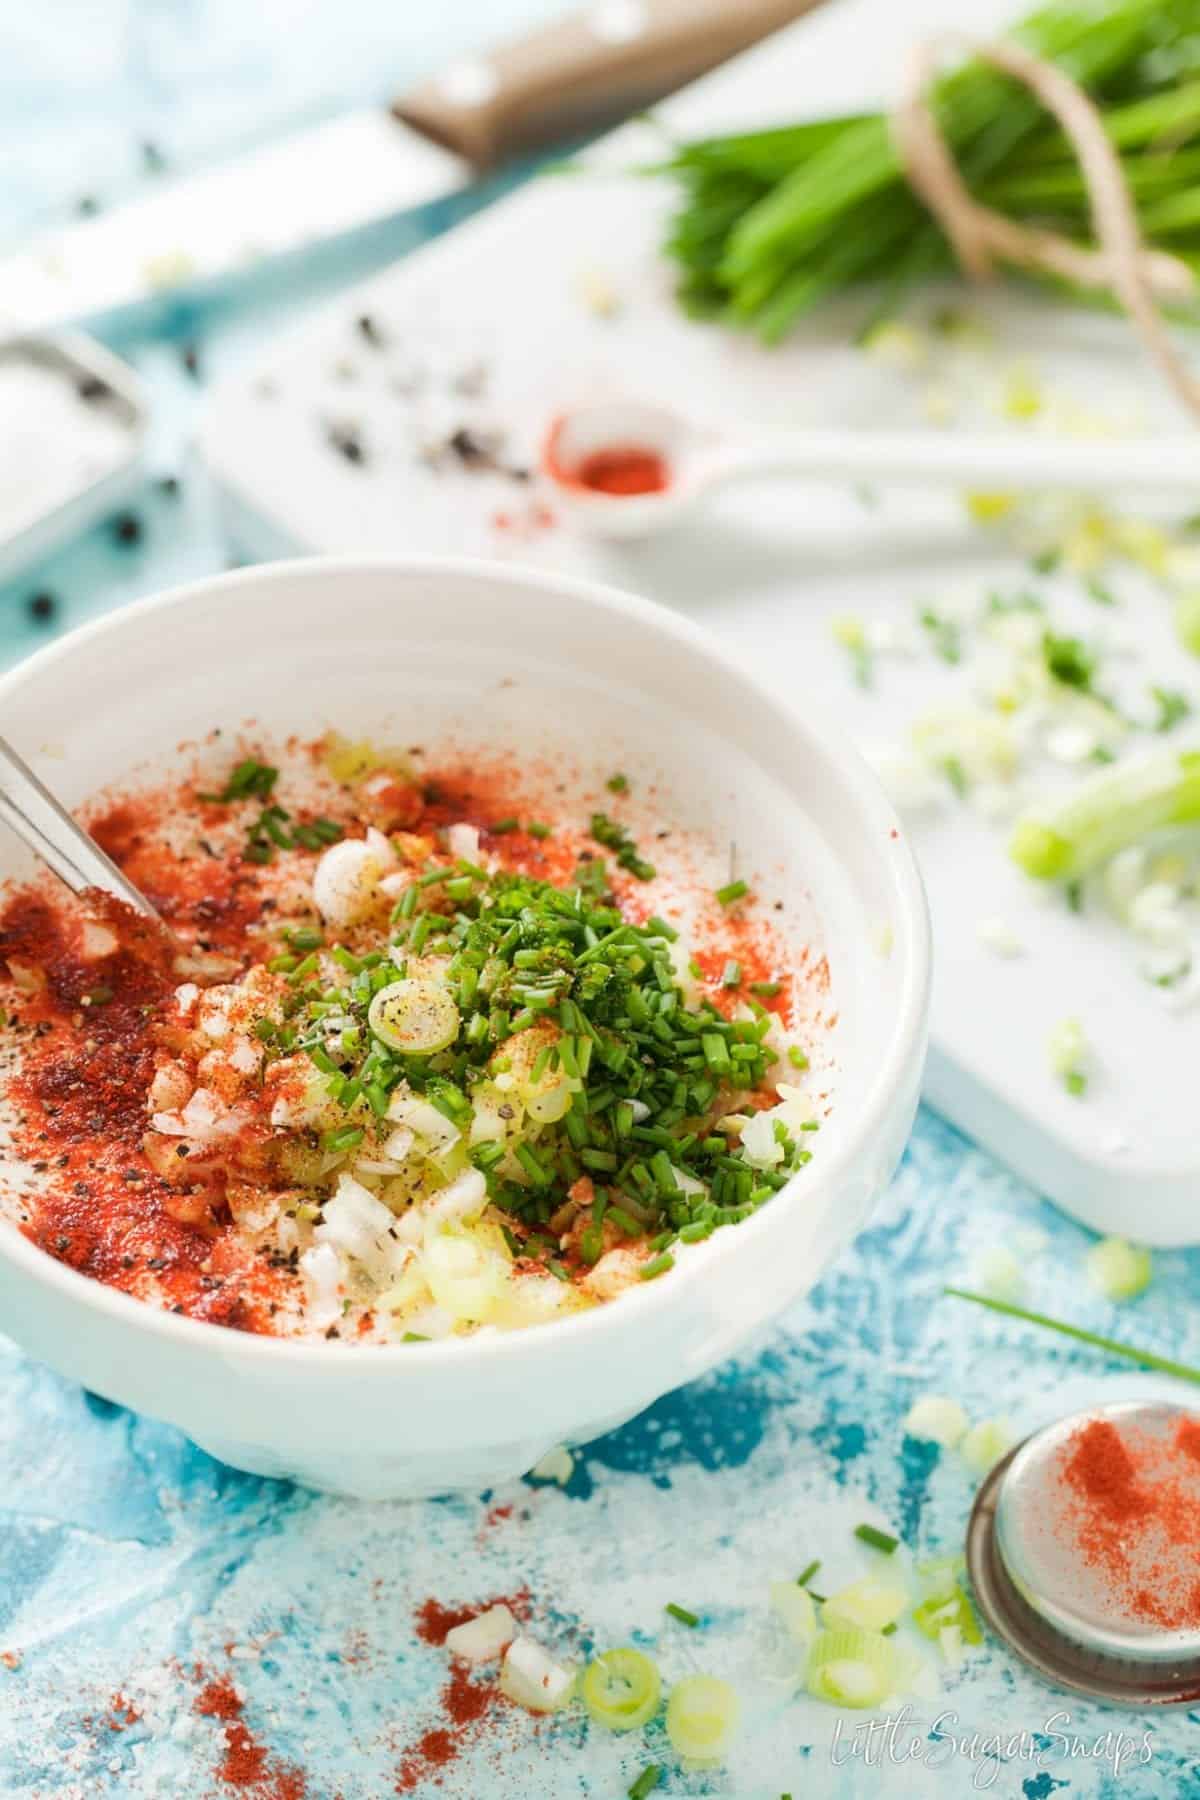 Ingredients in a bowl: soured cream, yoghurt, chives, paprika, spring onion.